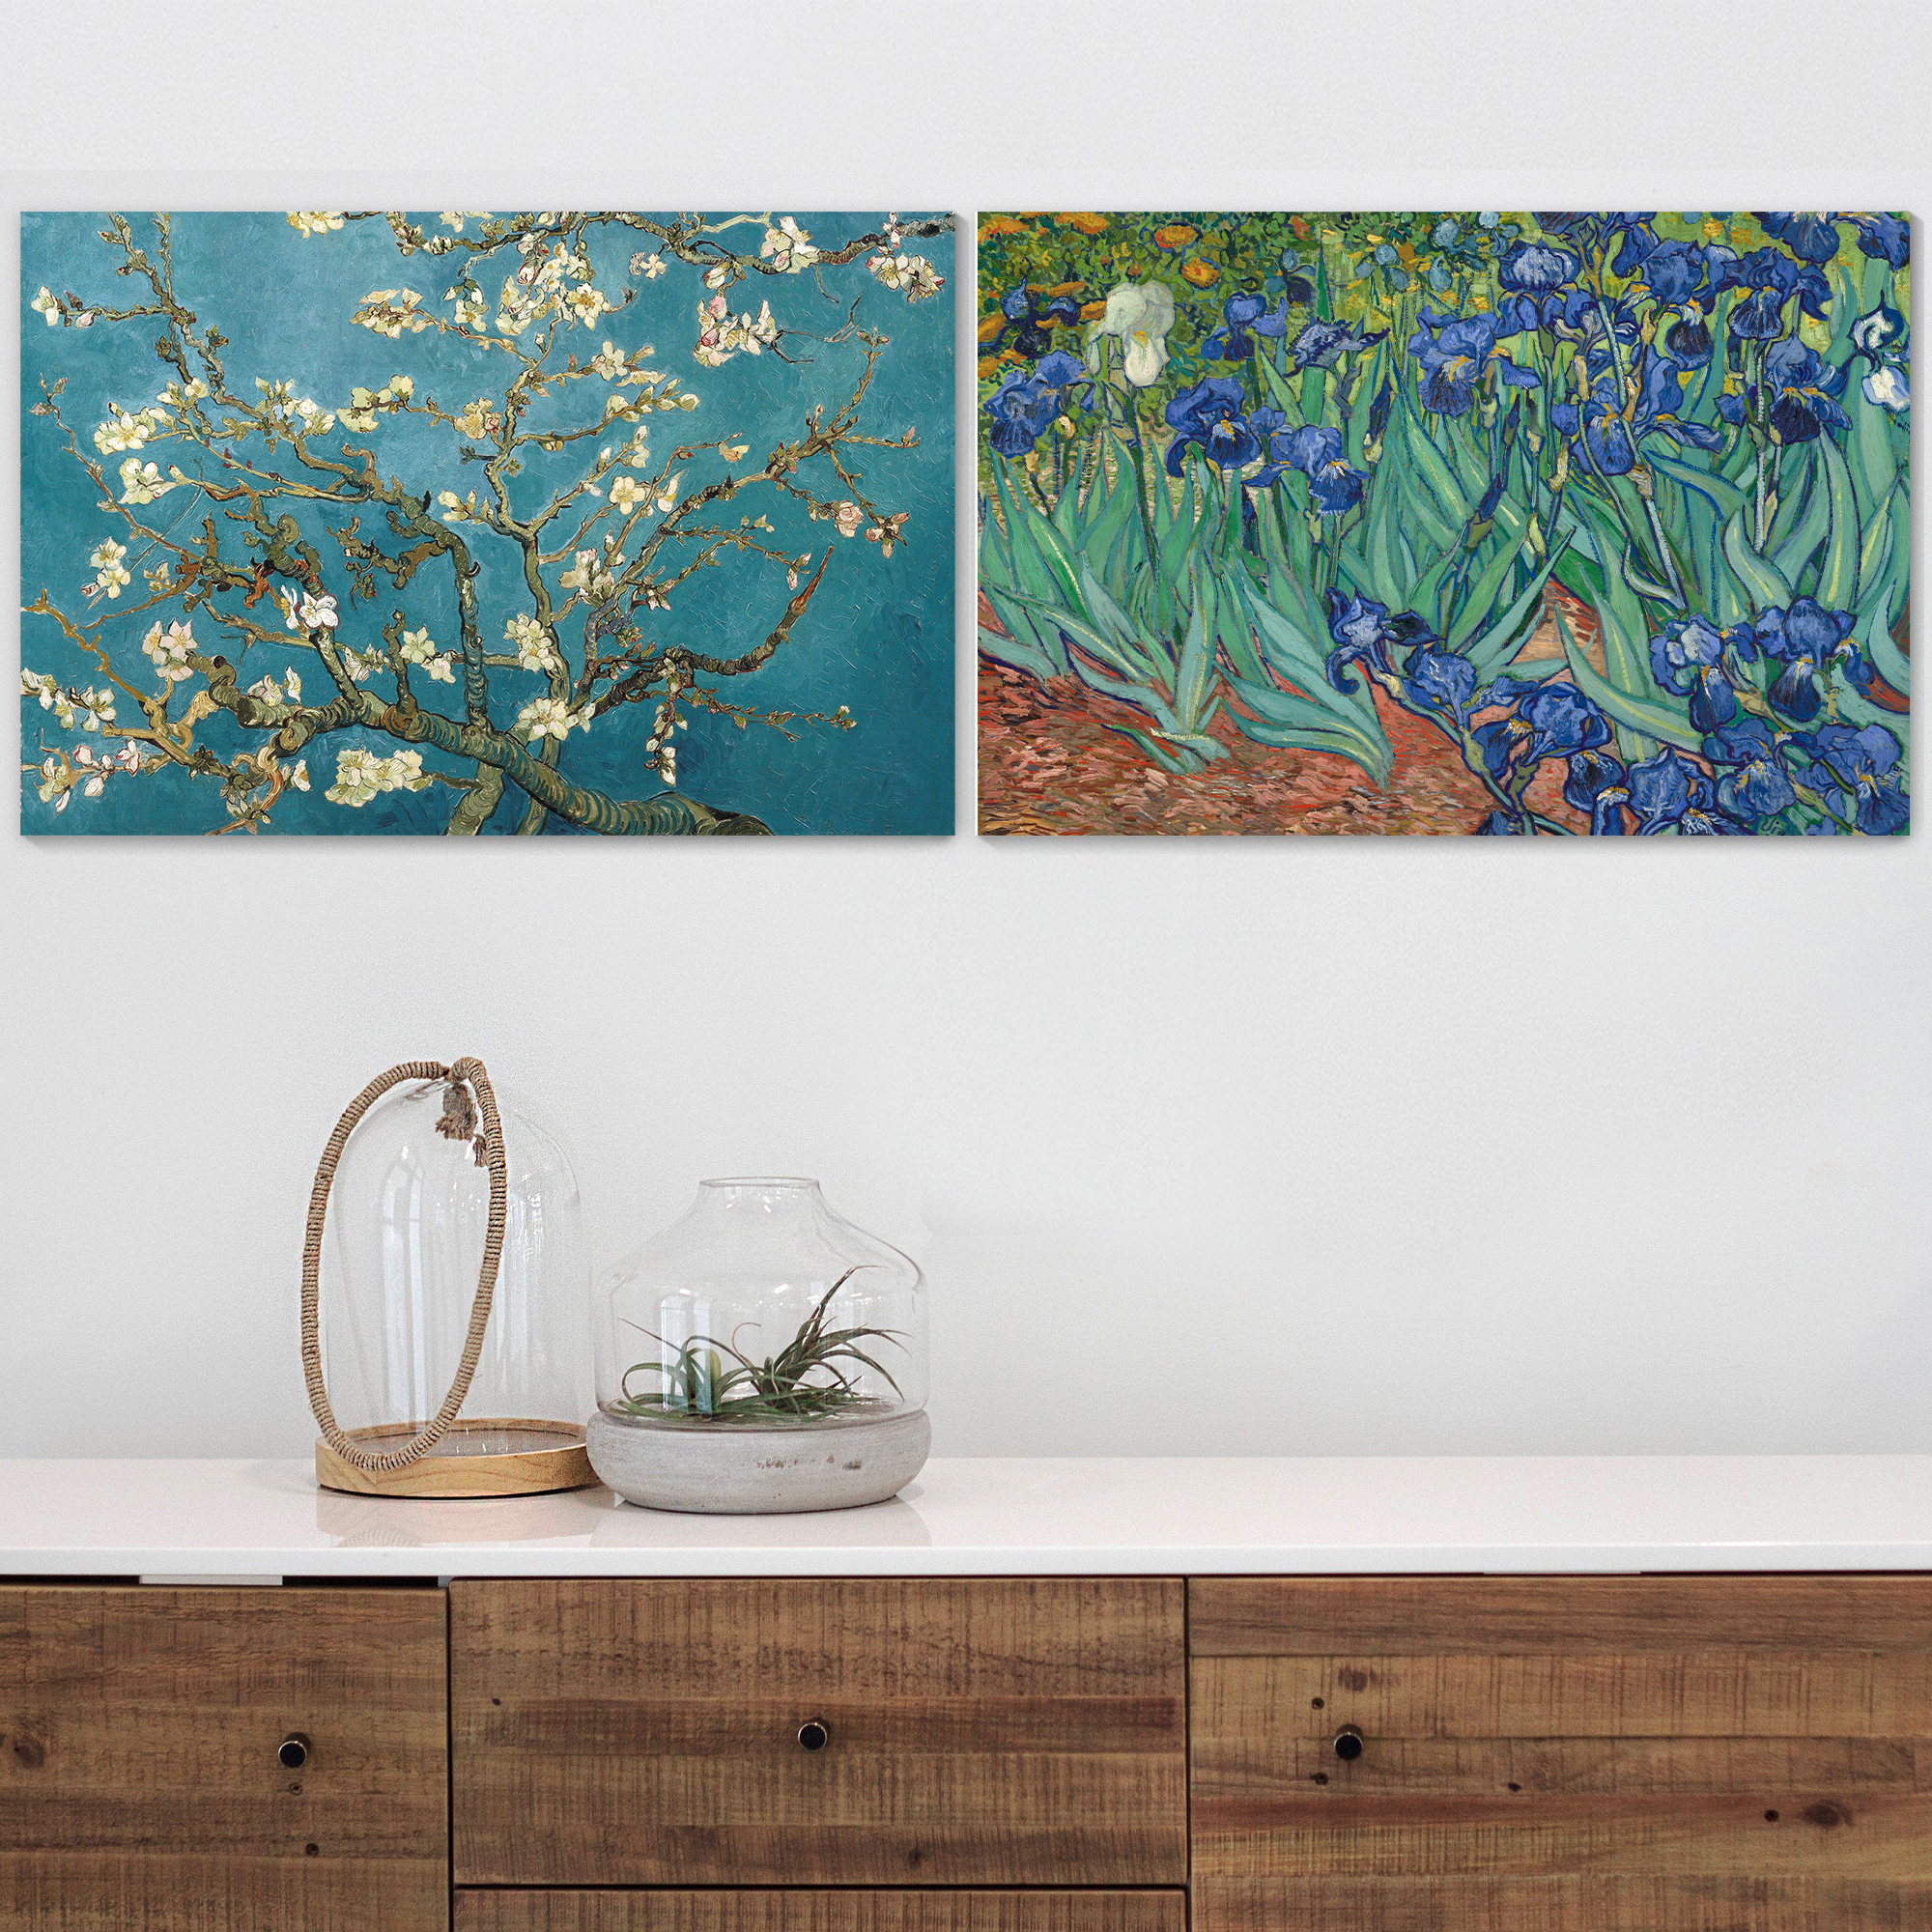 Wall26 - Irises/Almond Blossom by Vincent Van Gogh - Oil Painting Reproduction in Set of 2 | Canvas Prints Wall Art, Ready to Hang - 16